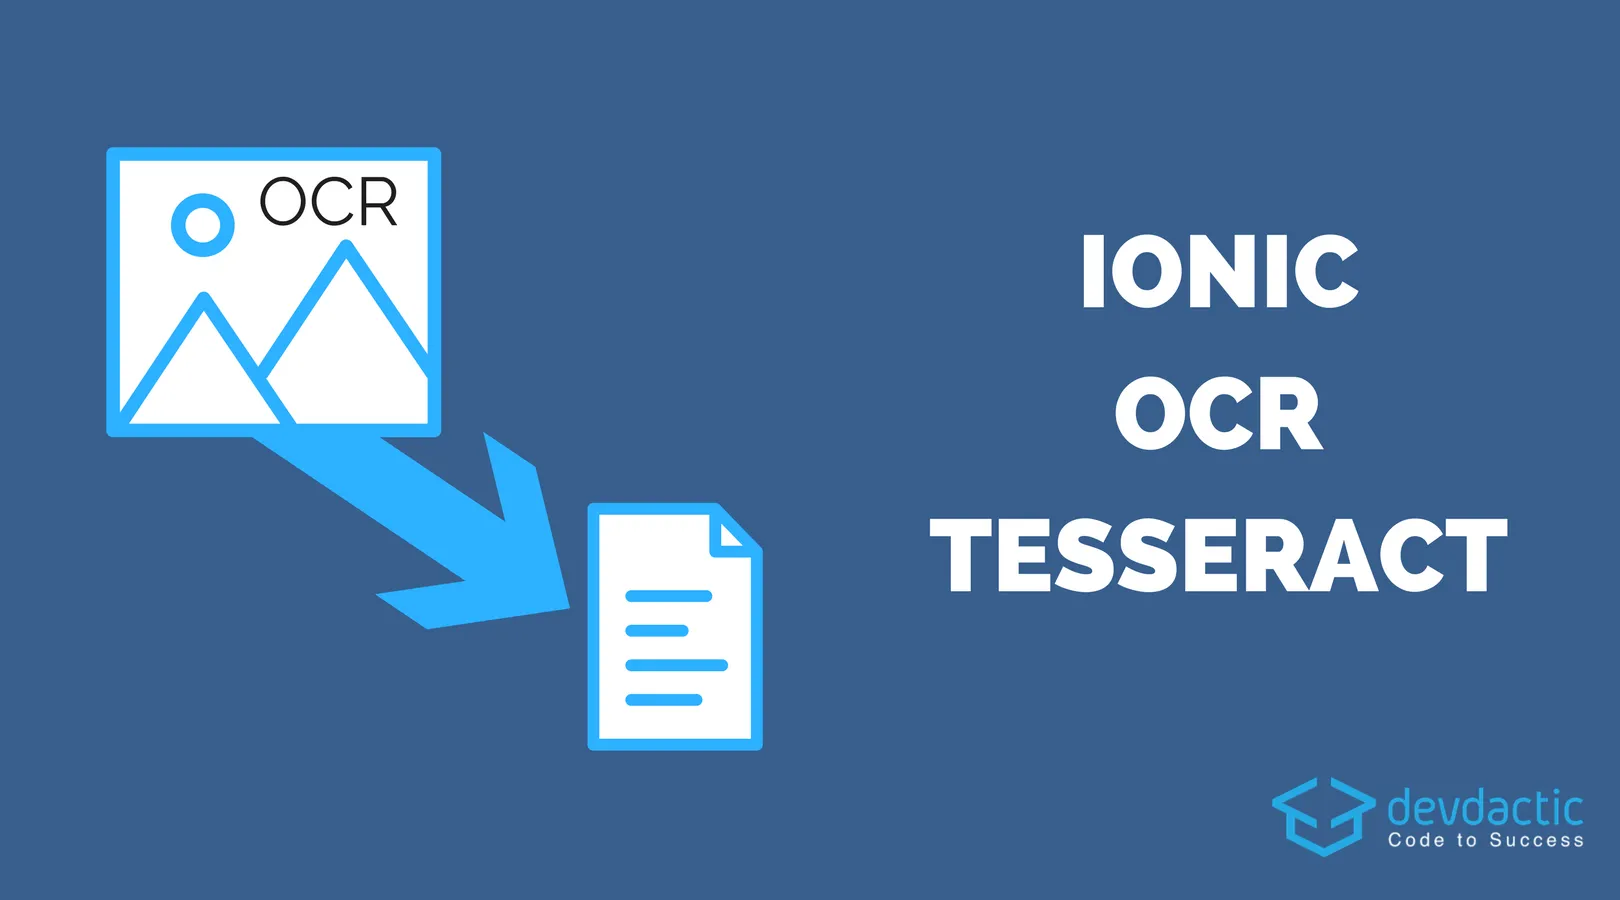 Building an Ionic OCR App with Tesseract